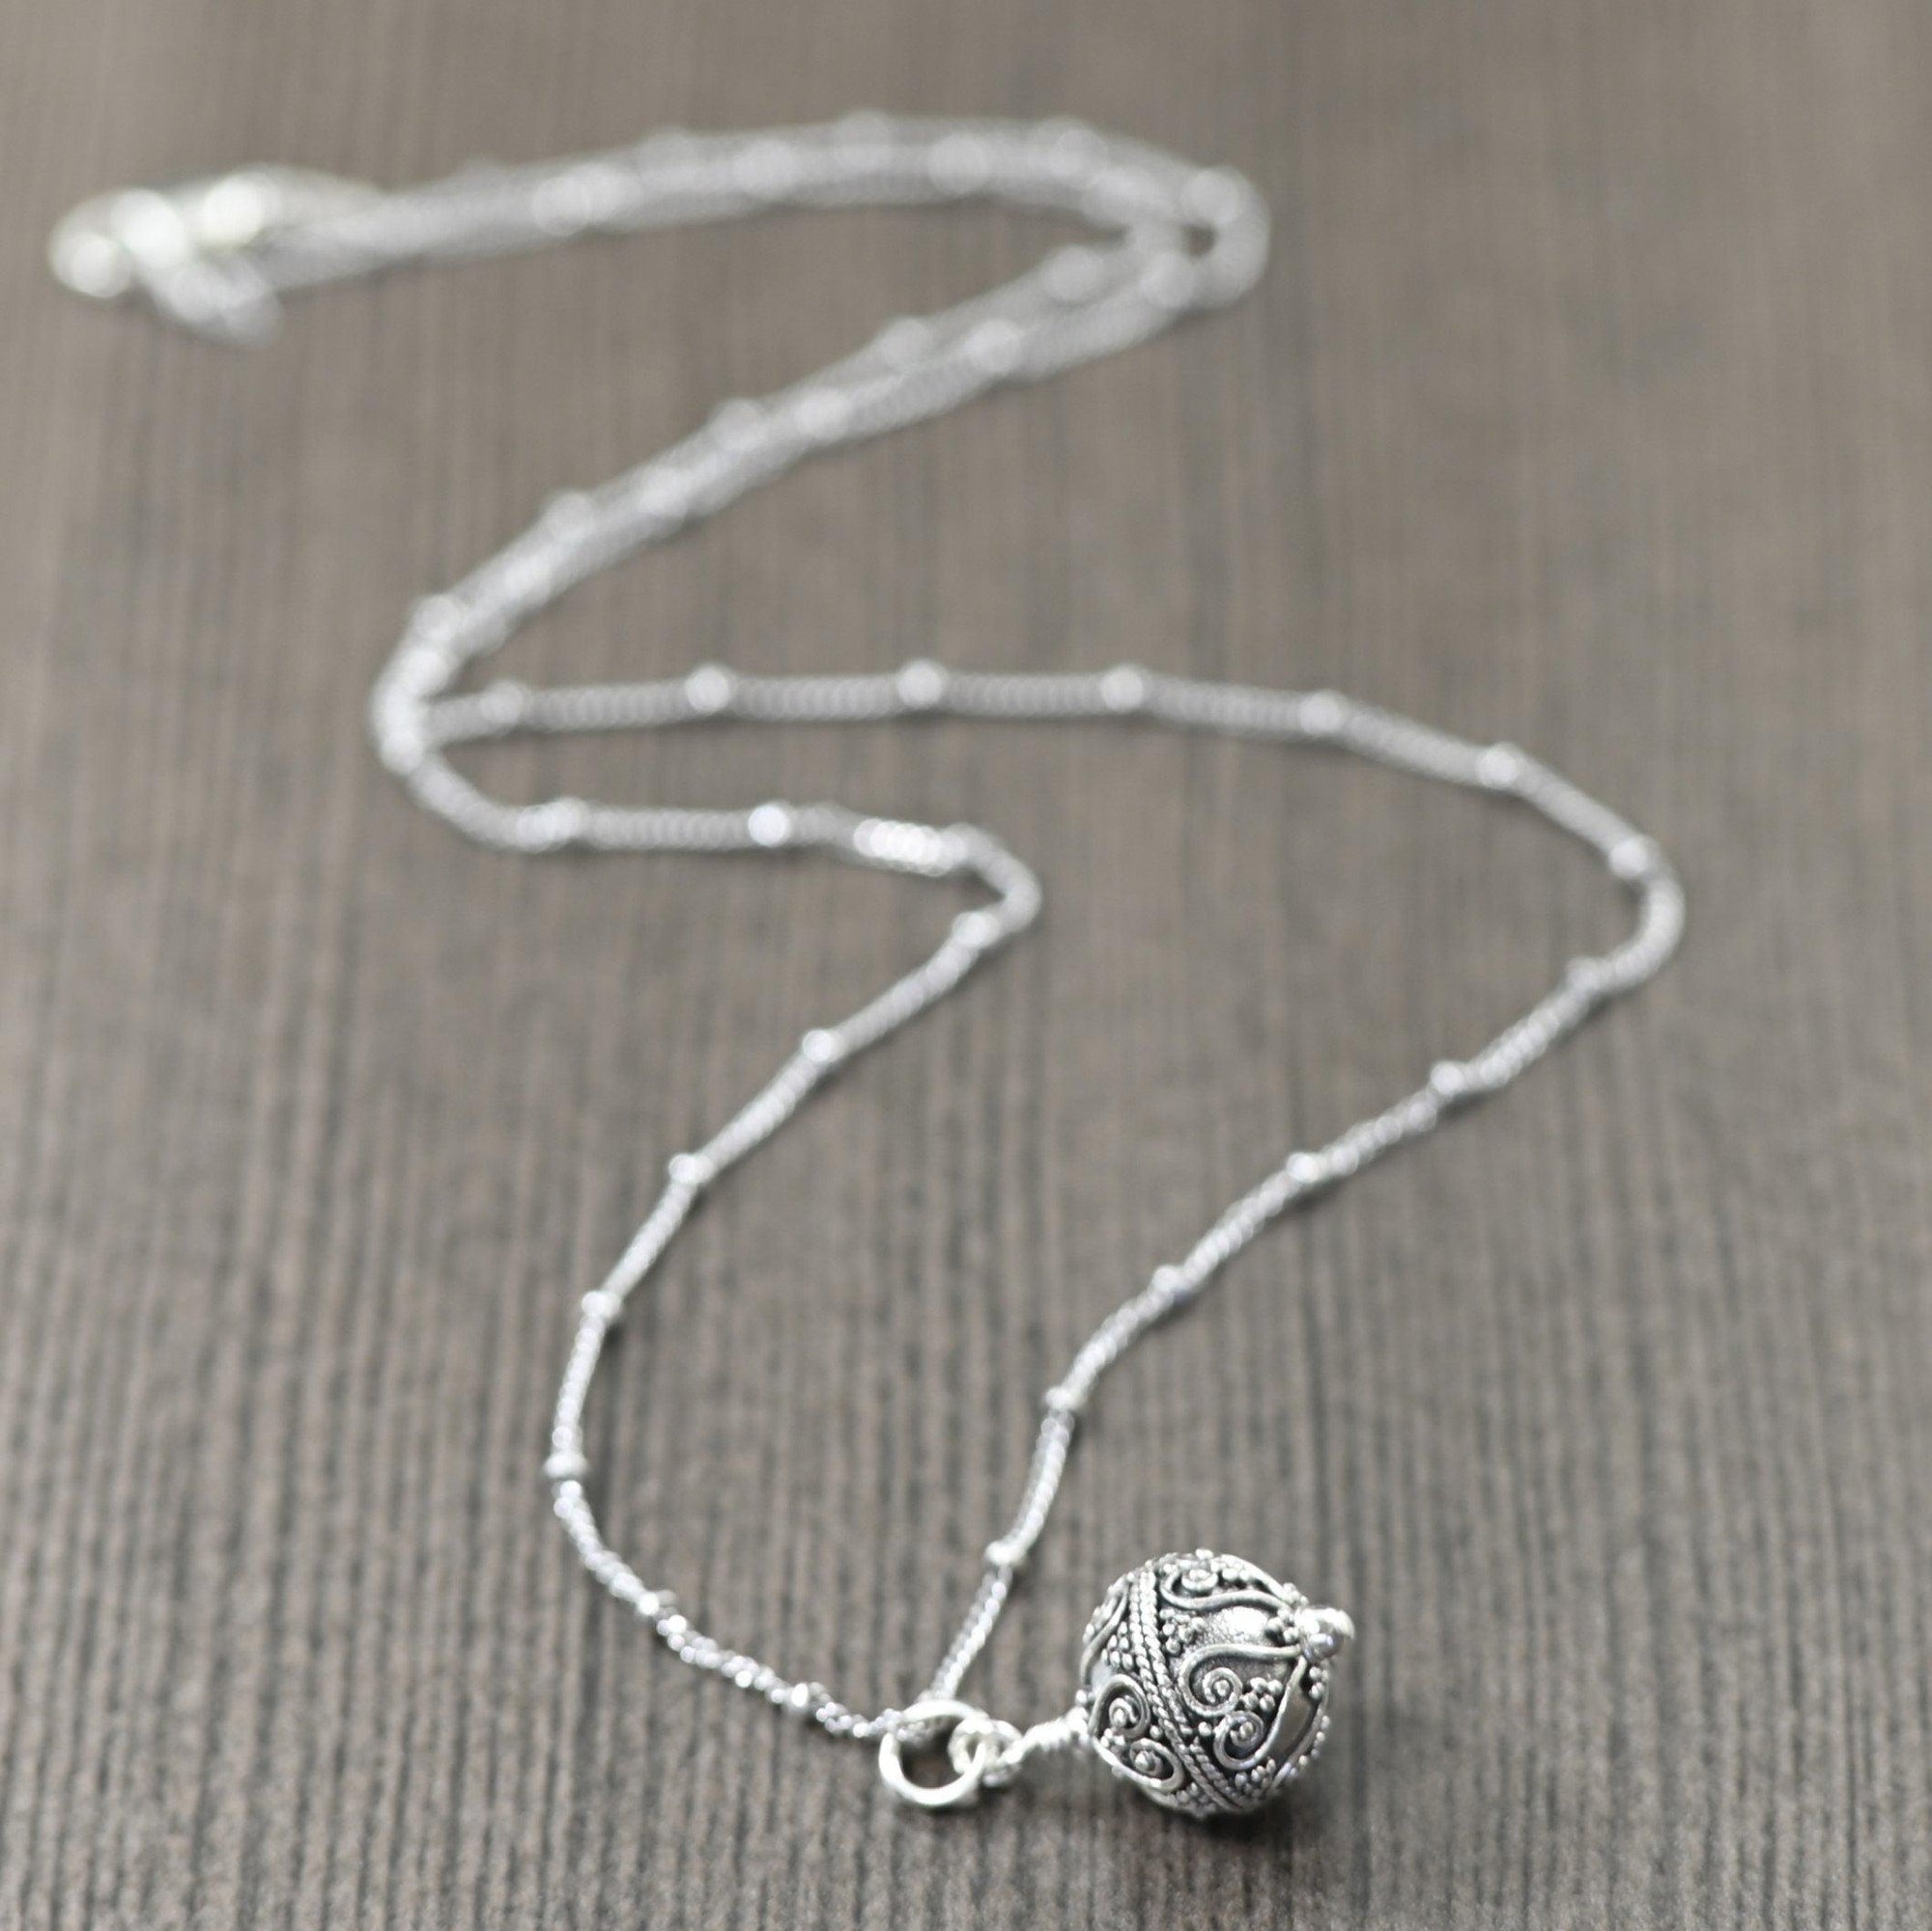 Sterling silver bali pendant necklace on sterling silver chain, Gifts for her 16, 18 and 20 inch chains available